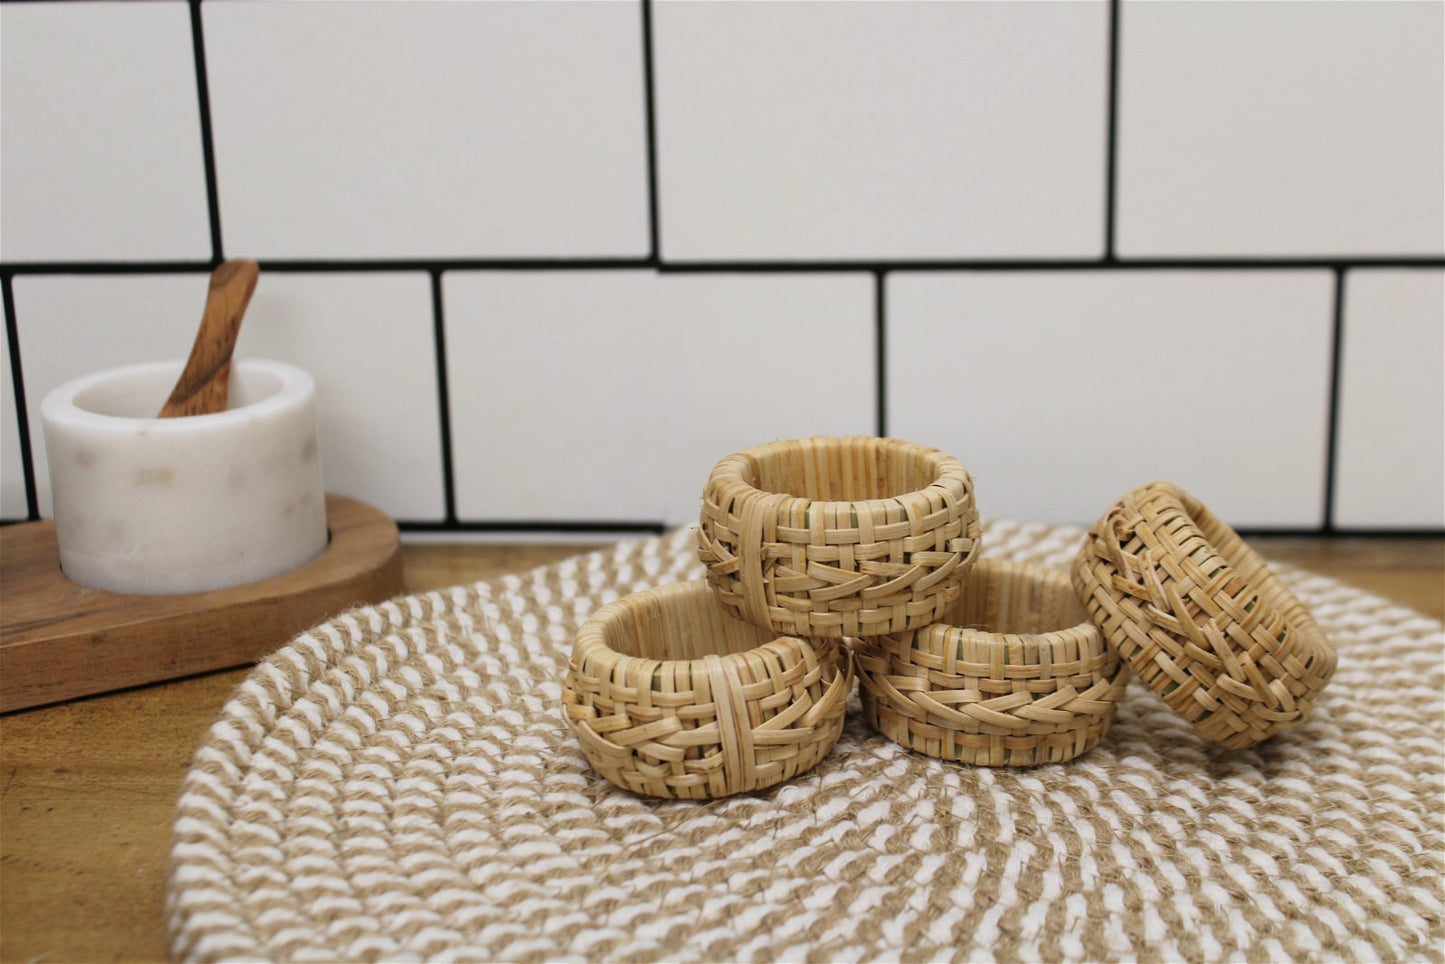 Set of Four Rattan Napking Holders - a Cheeky Plant